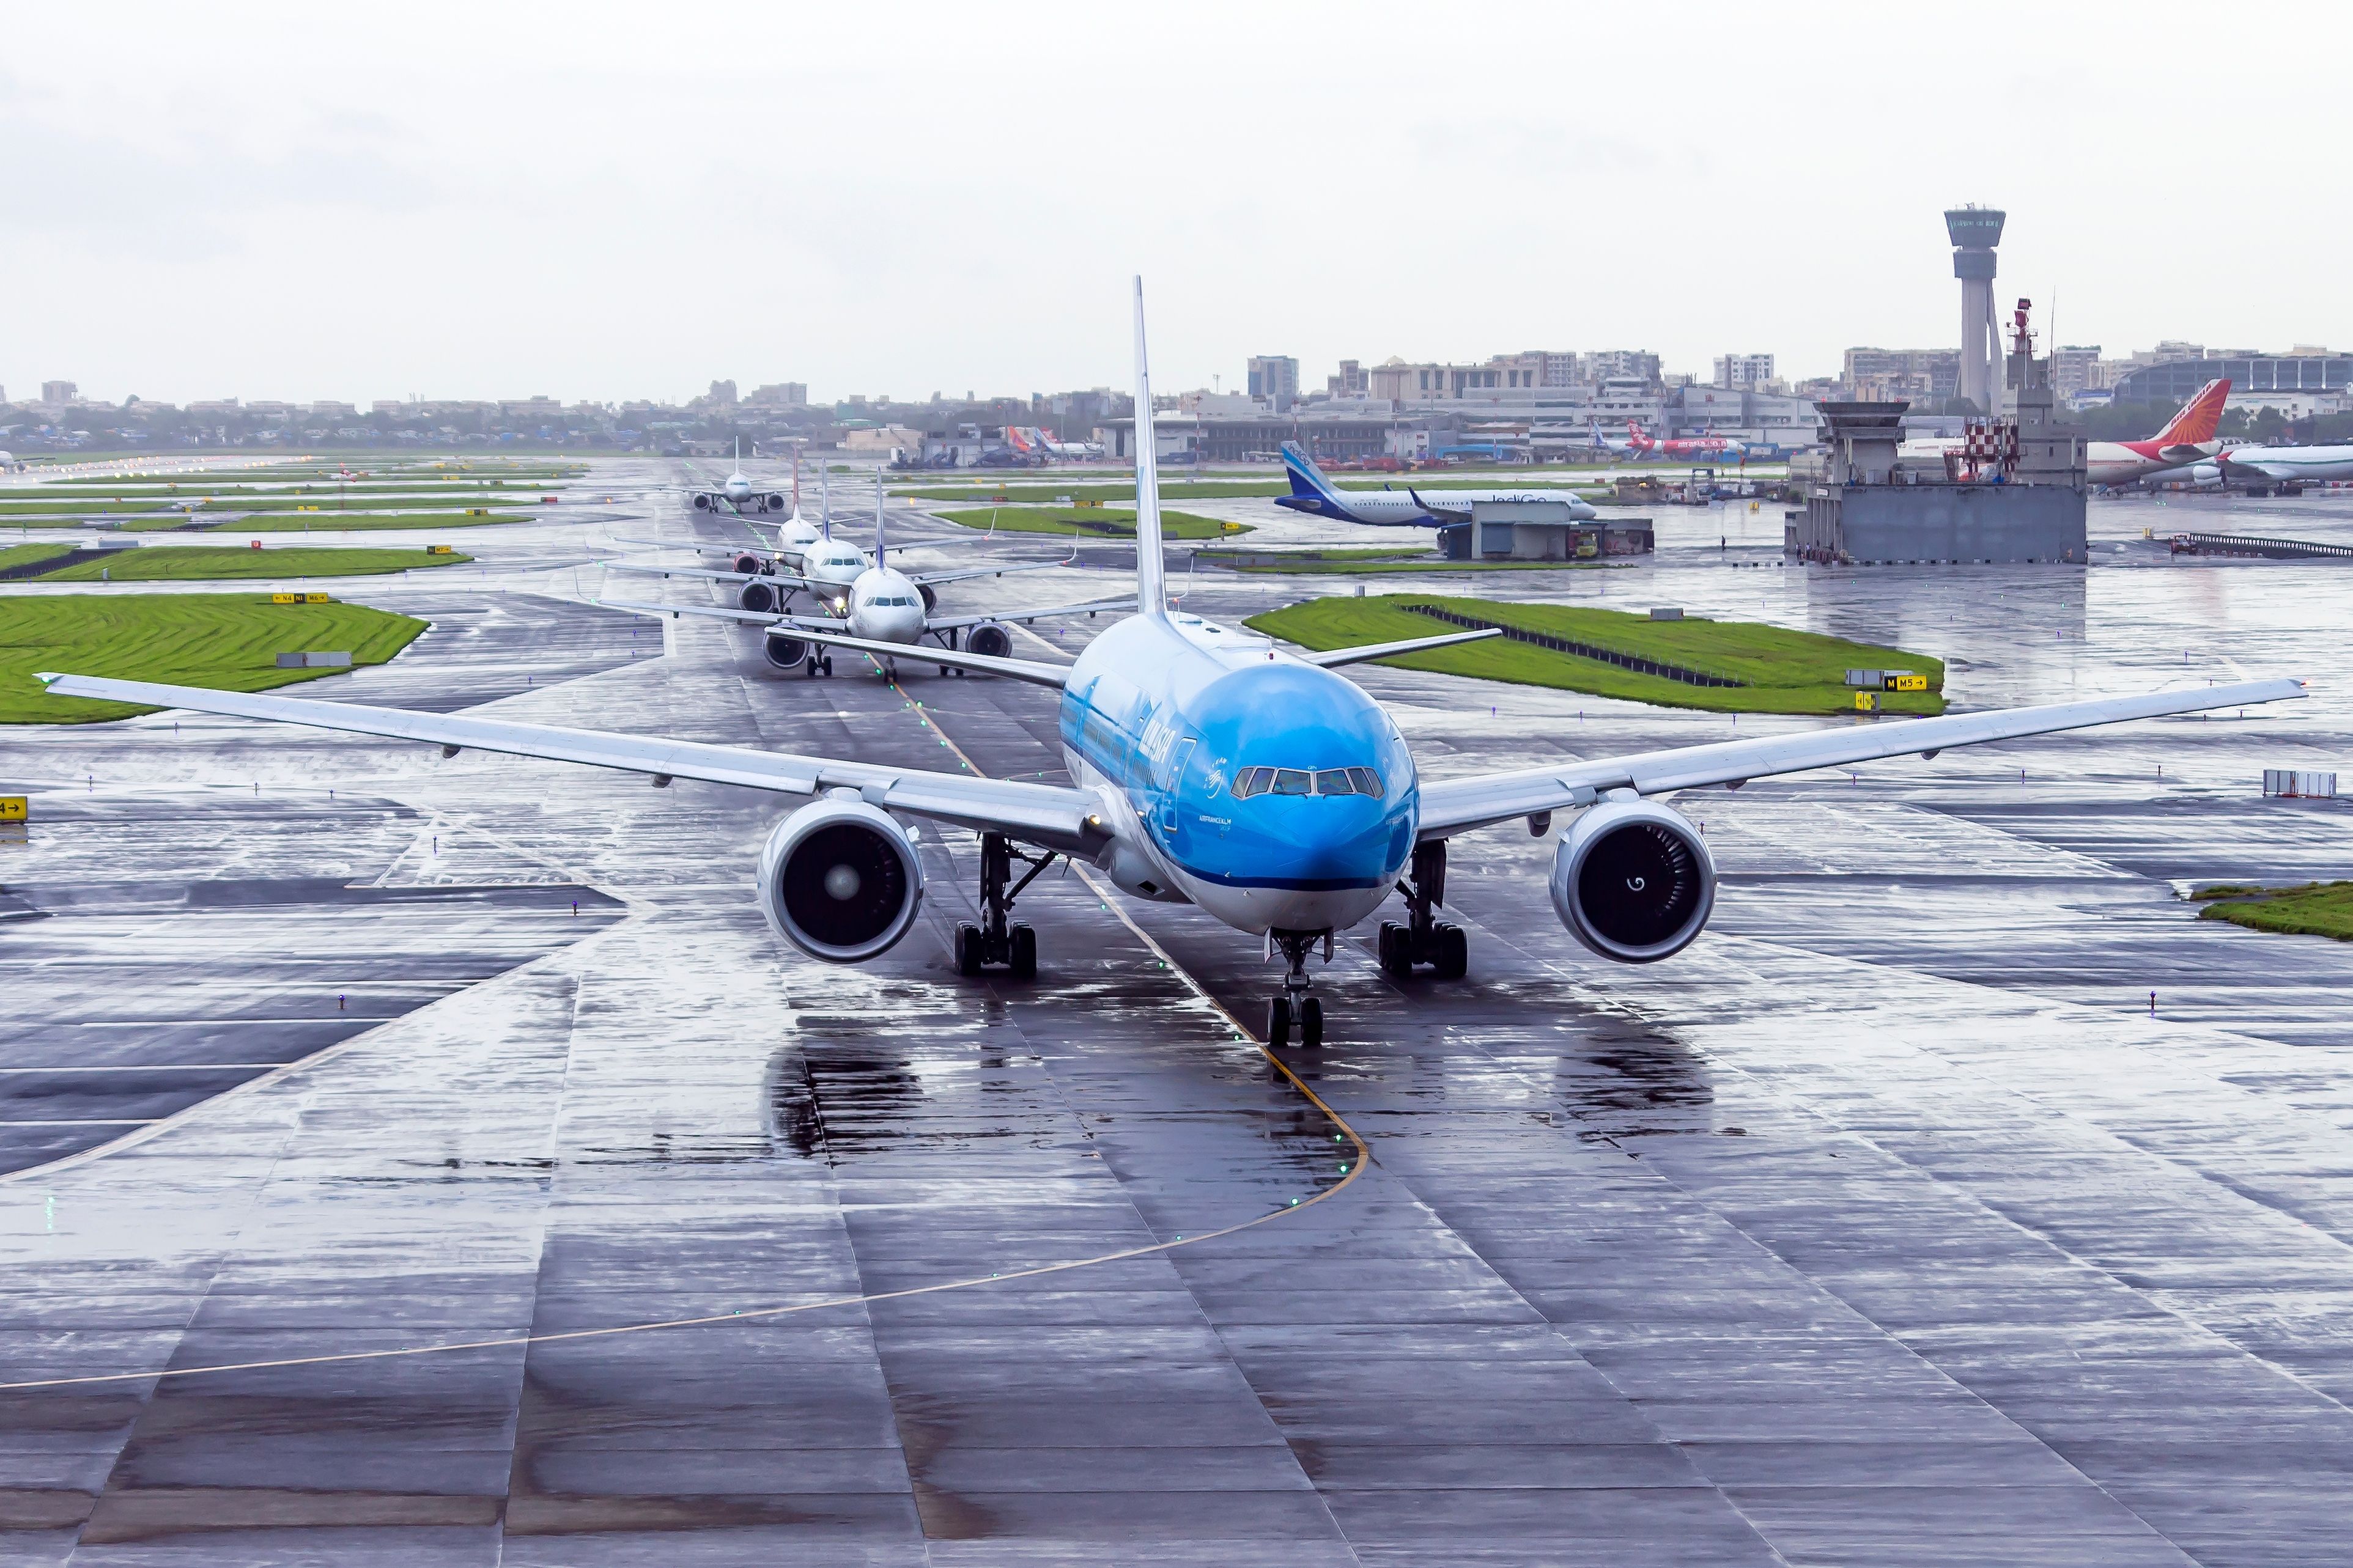 KLM's Boeing 777 taxiing at Mumbai Airport for departure